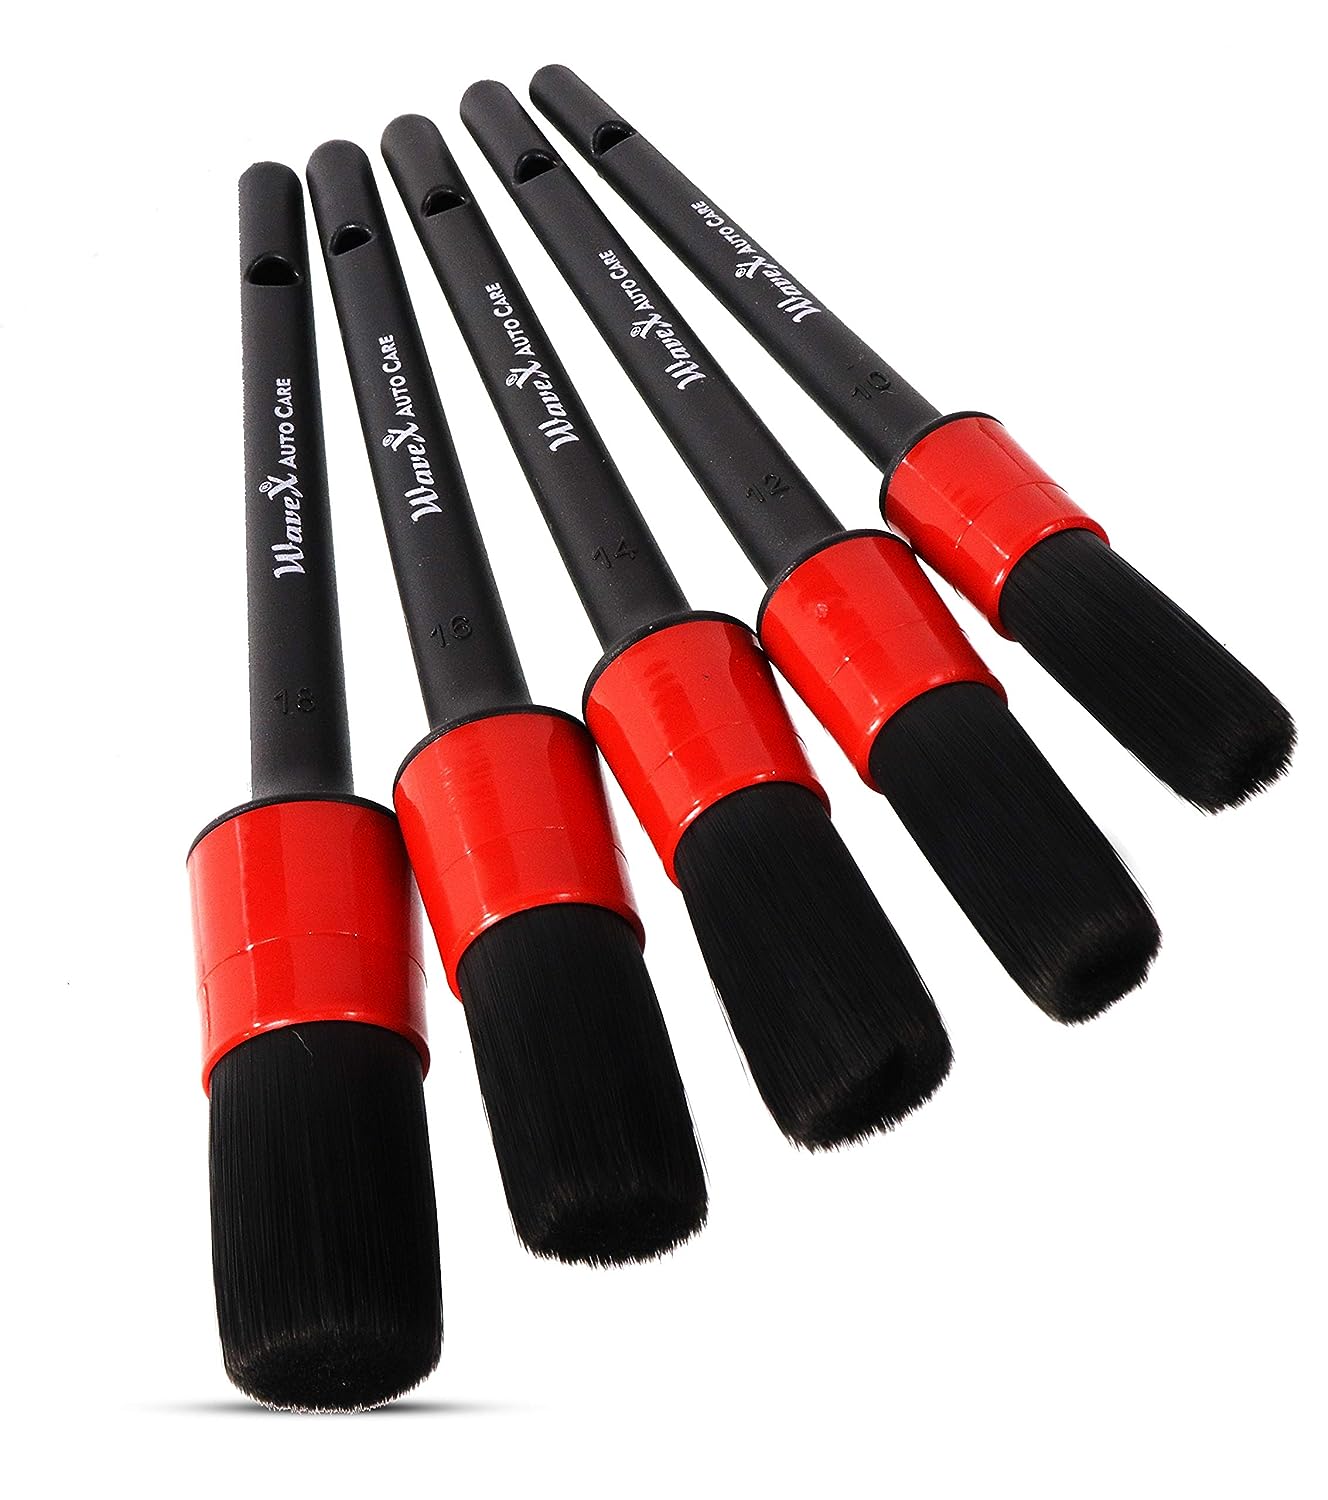 Car Interior AC Vents Cleaning Brush Soft Duster Interior Cleaning